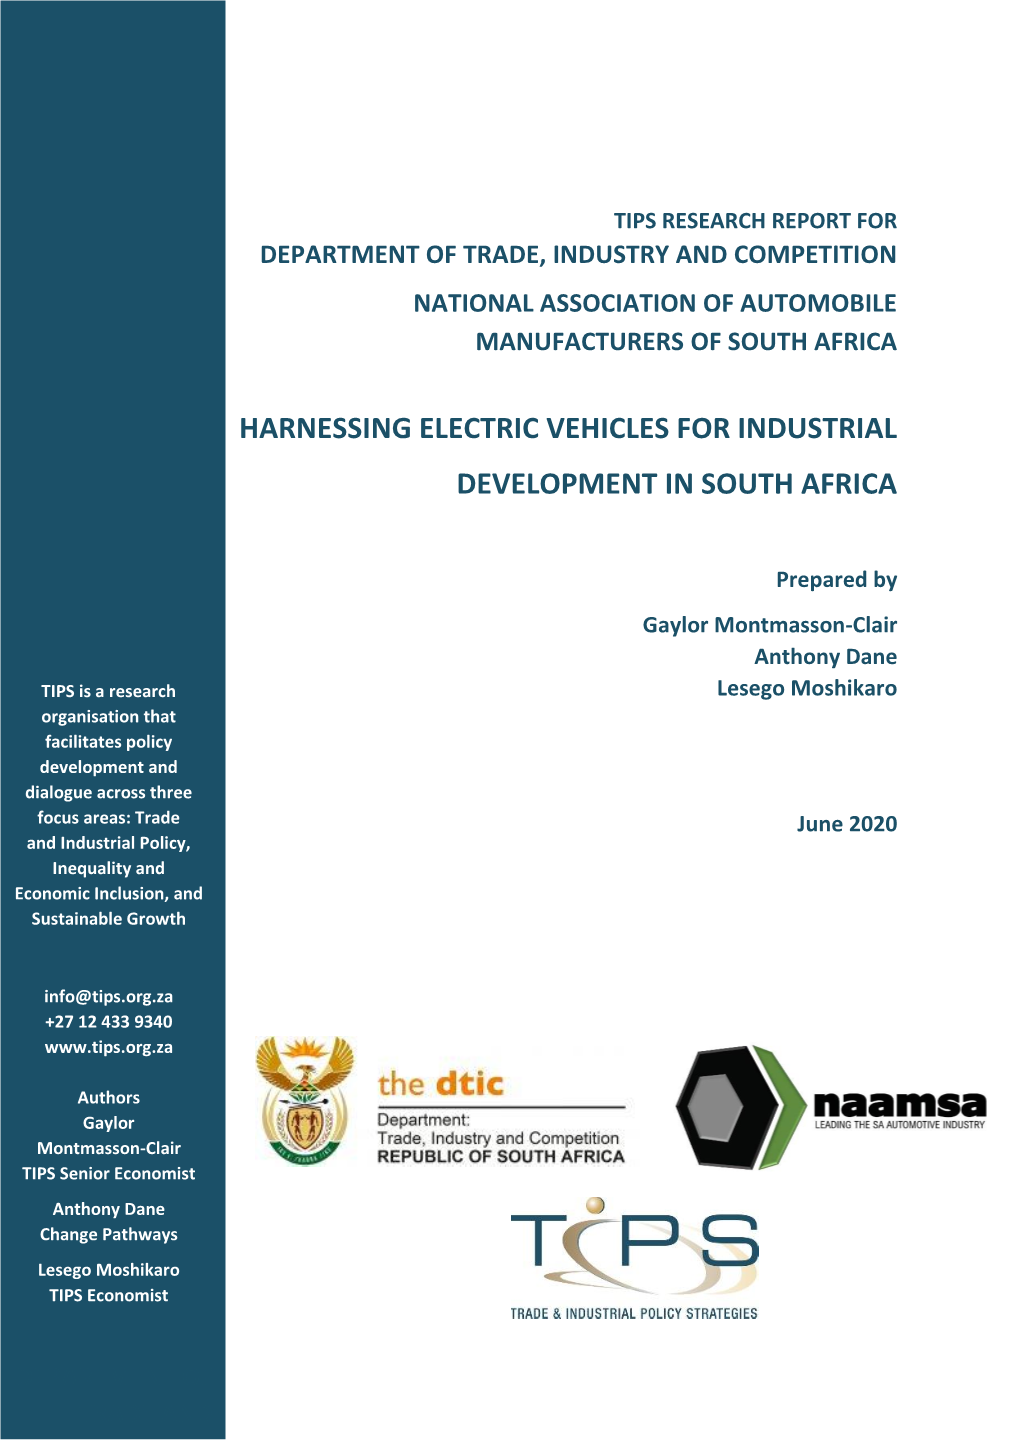 Harnessing Electric Vehicles for Industrial Development